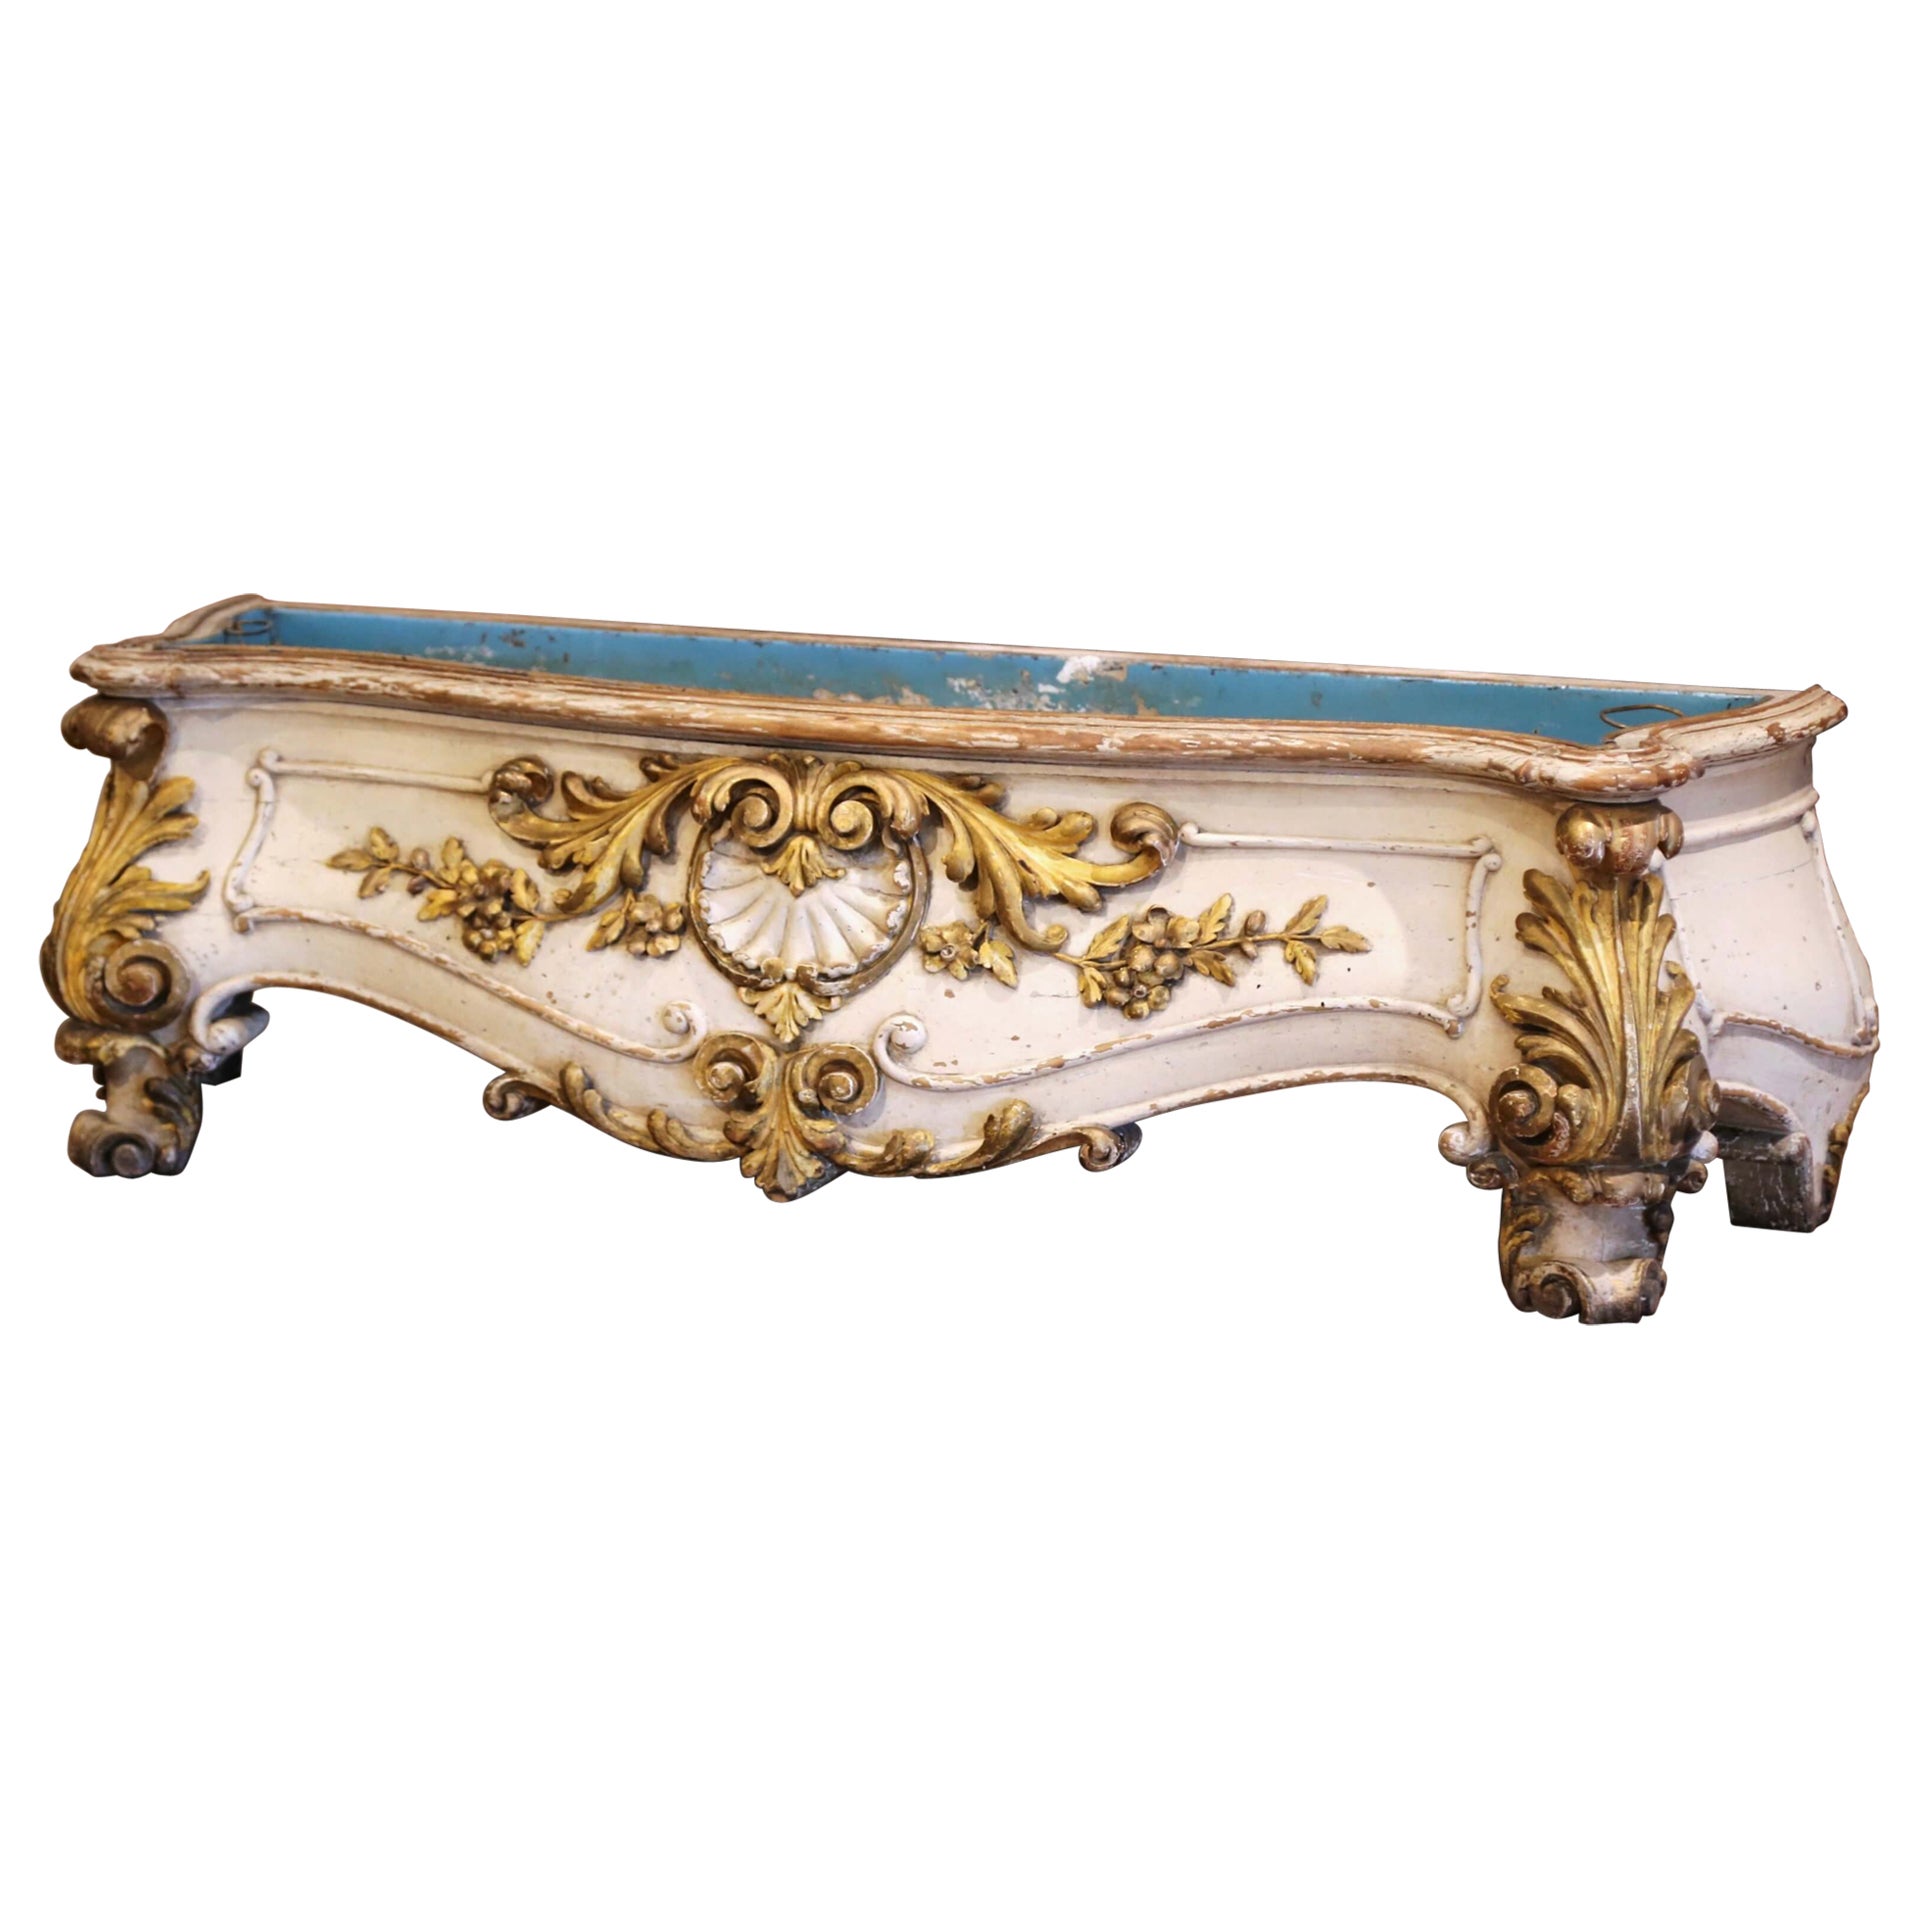 Early 19th Century, French Louis XV Carved Painted & Gilt Bombe Floor Jardinière